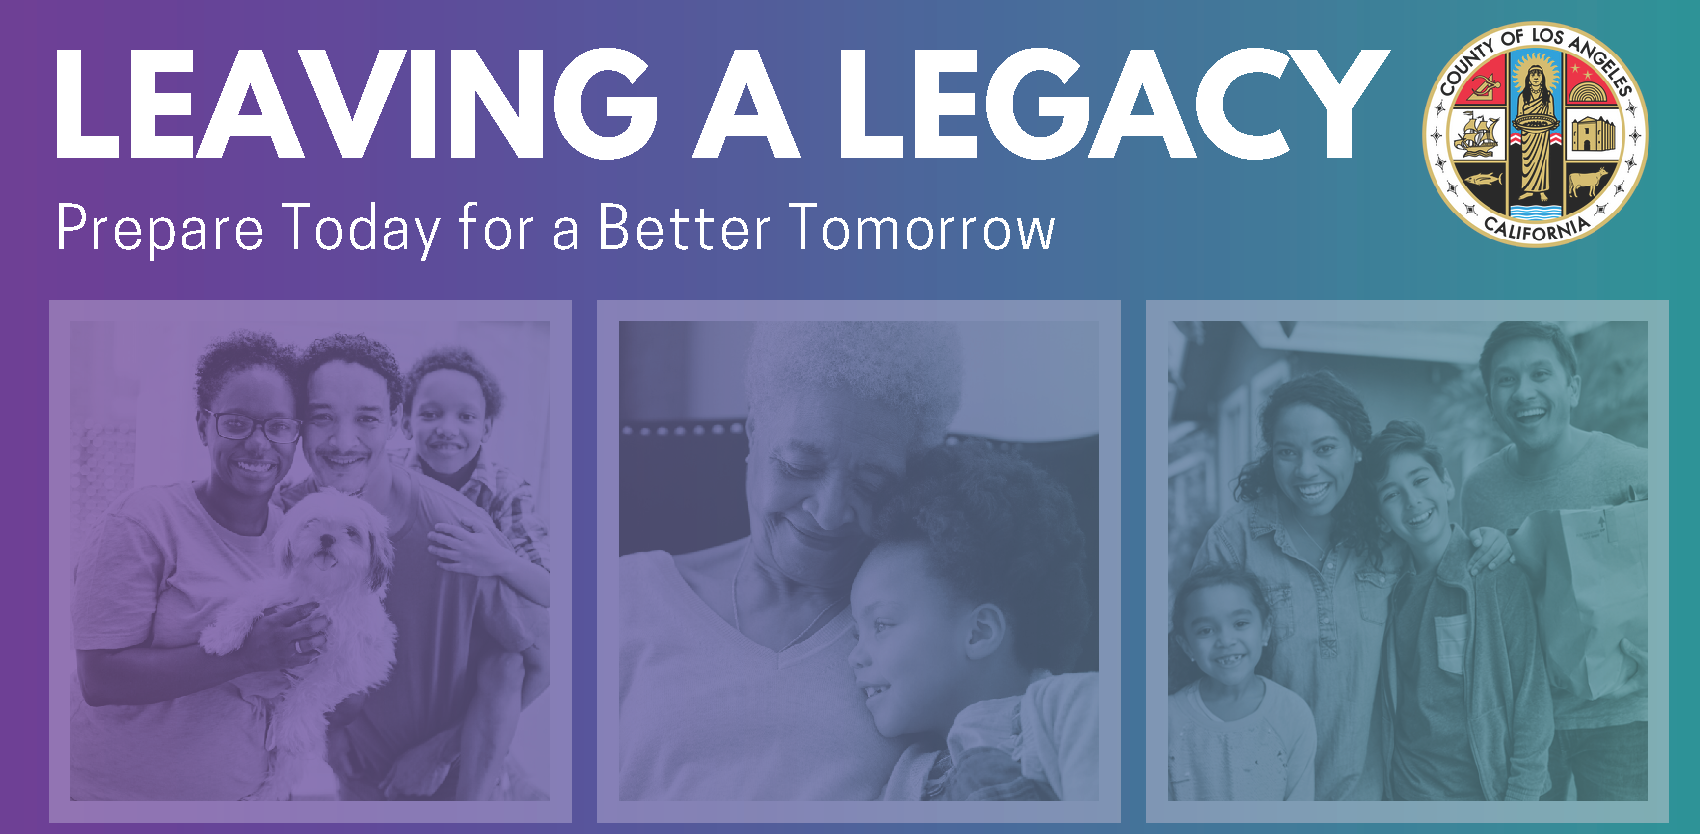 Leaving a Legacy: Prepare Today for a Better Tomorrow